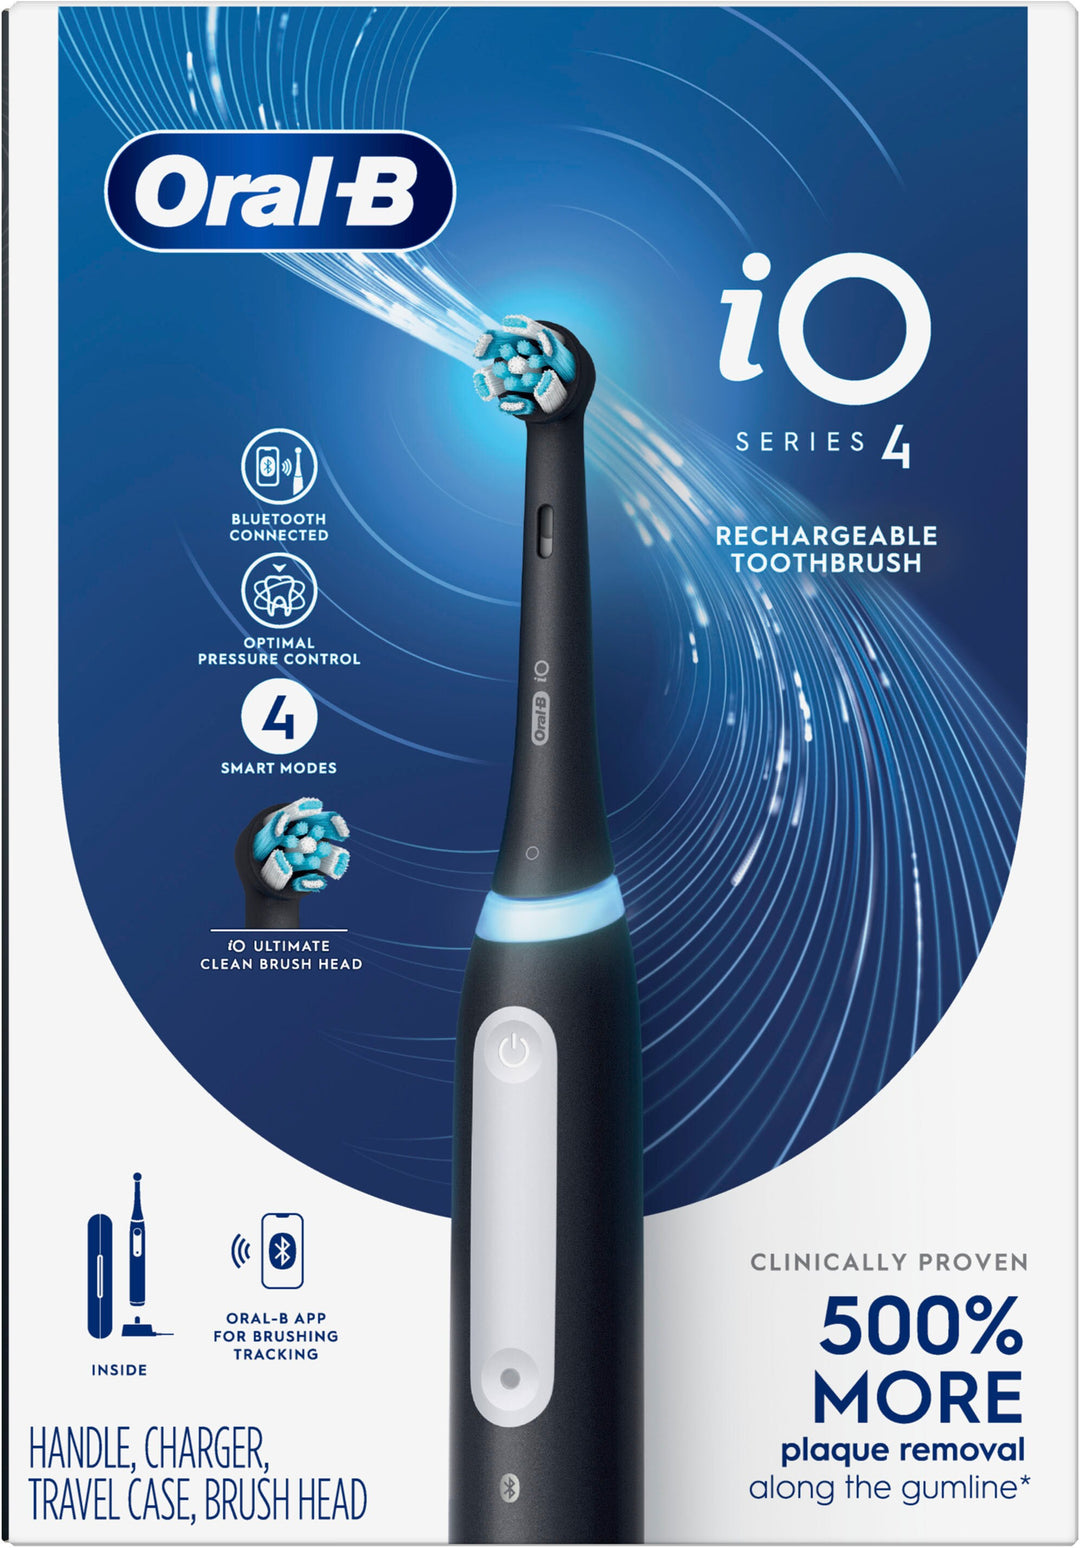 Oral-B - iO Series 4 Rechargeable Electric Toothbrush w/Brush Head - Black_3